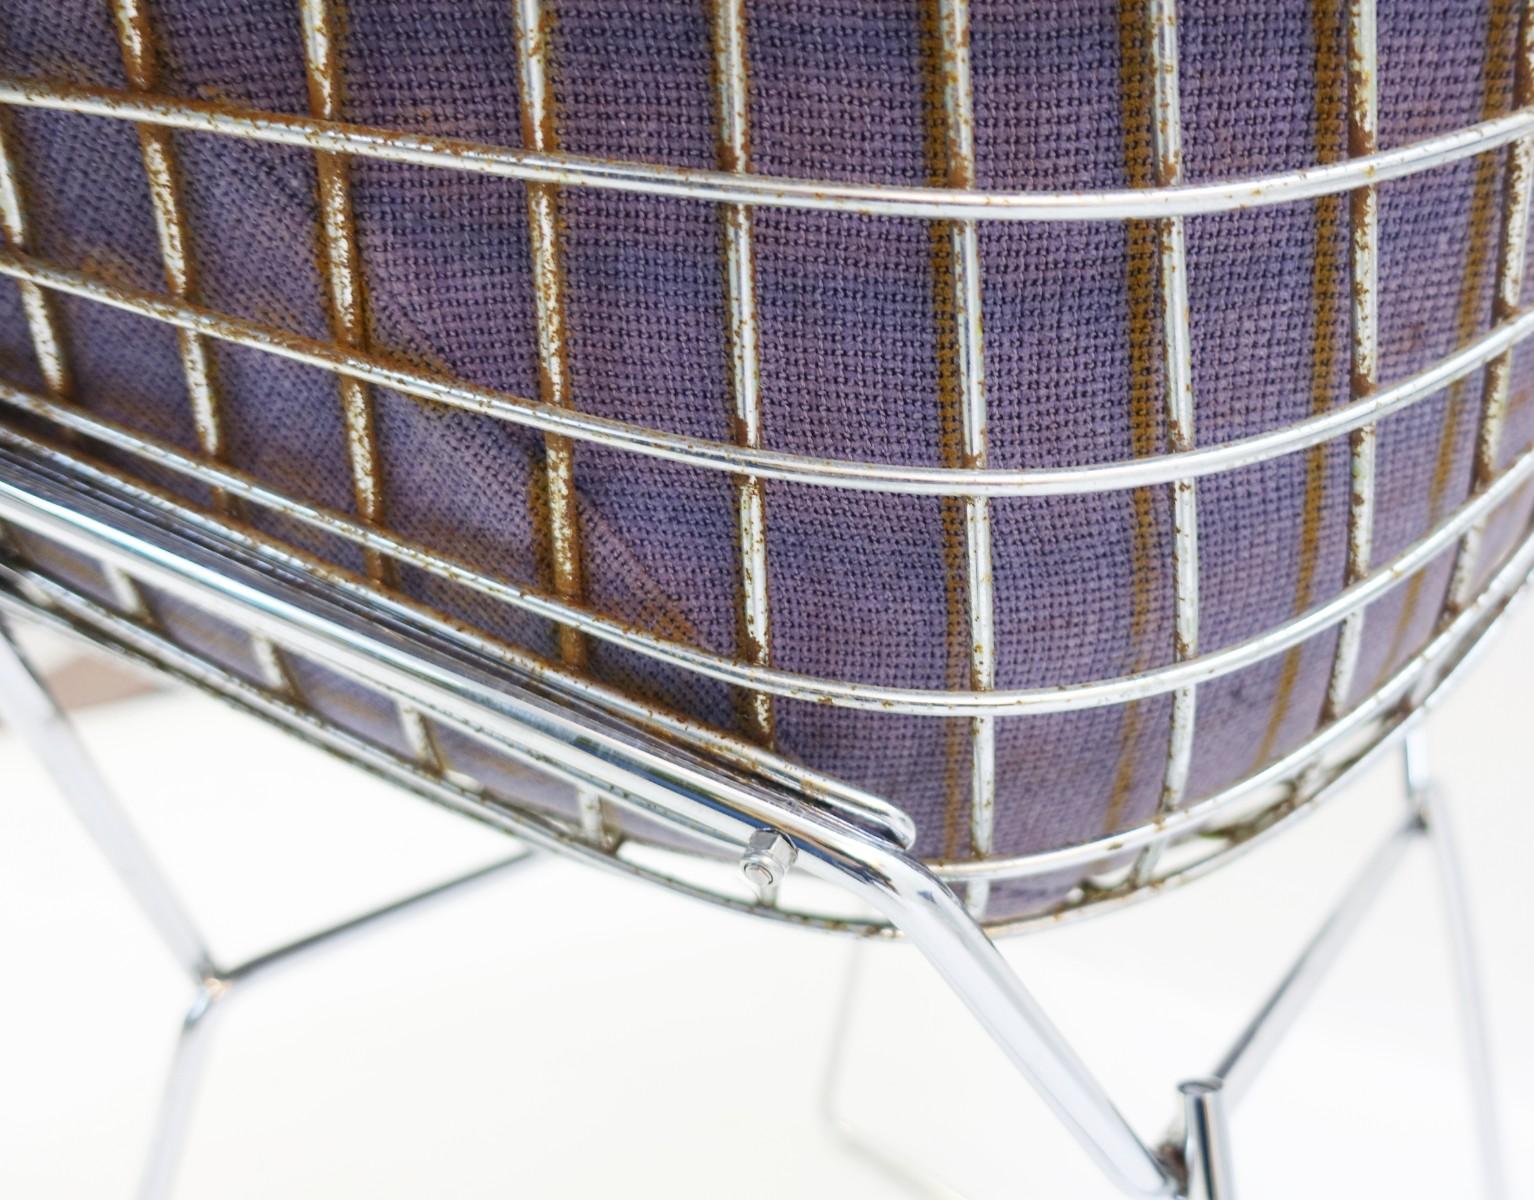 Diamond chairs by Harry Bertoia for Knoll International, 6 available
Sold par piece 1200€.
 